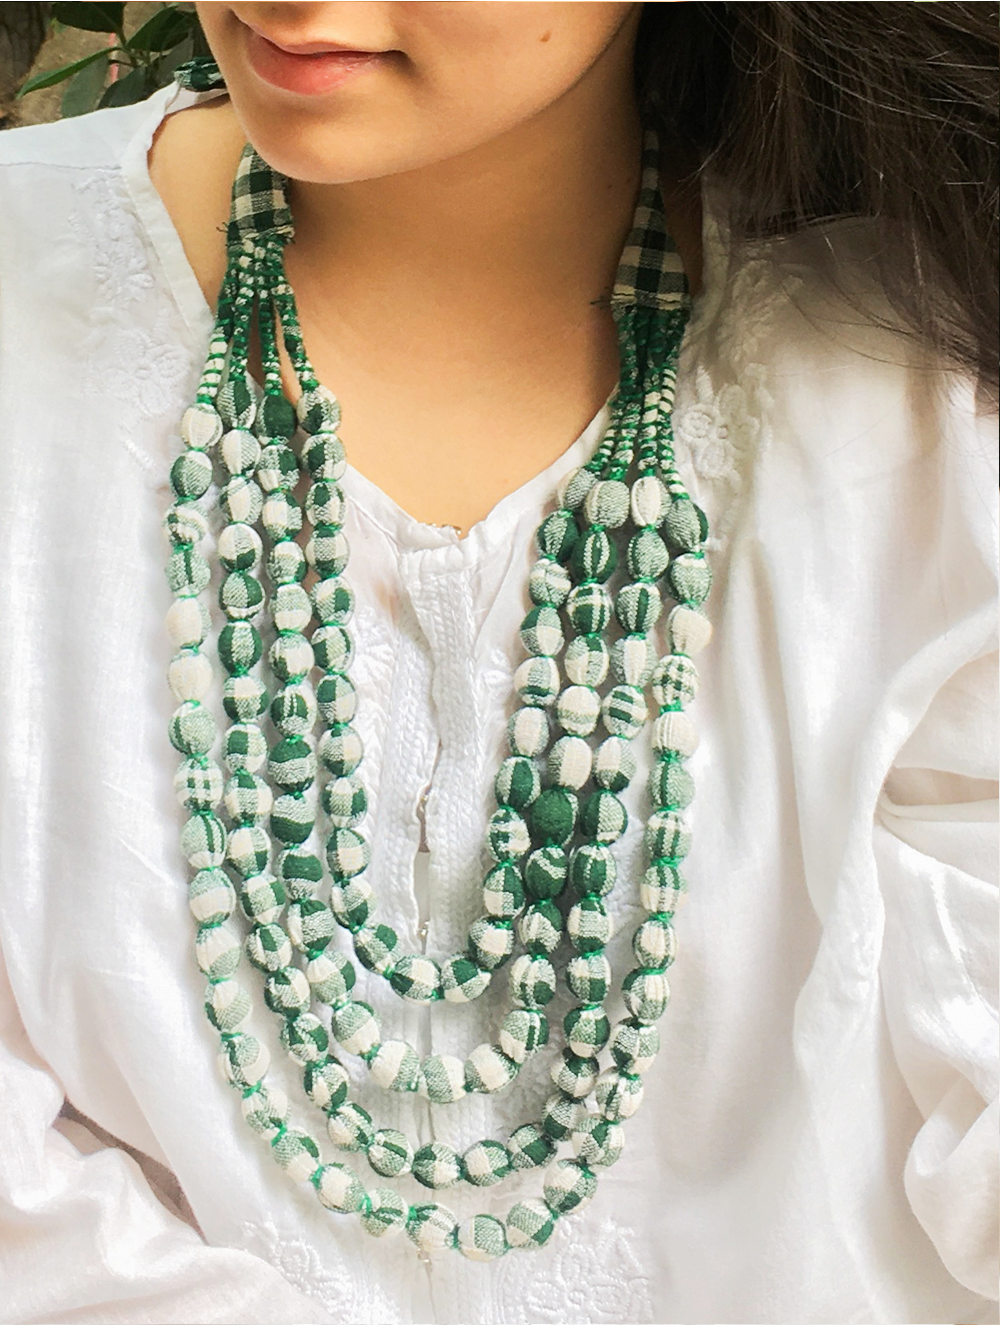 Load image into Gallery viewer, Bohemian Beauty - Handcrafted Cotton Fabric Beads Neckpiece; Green Checked, 4 Strings